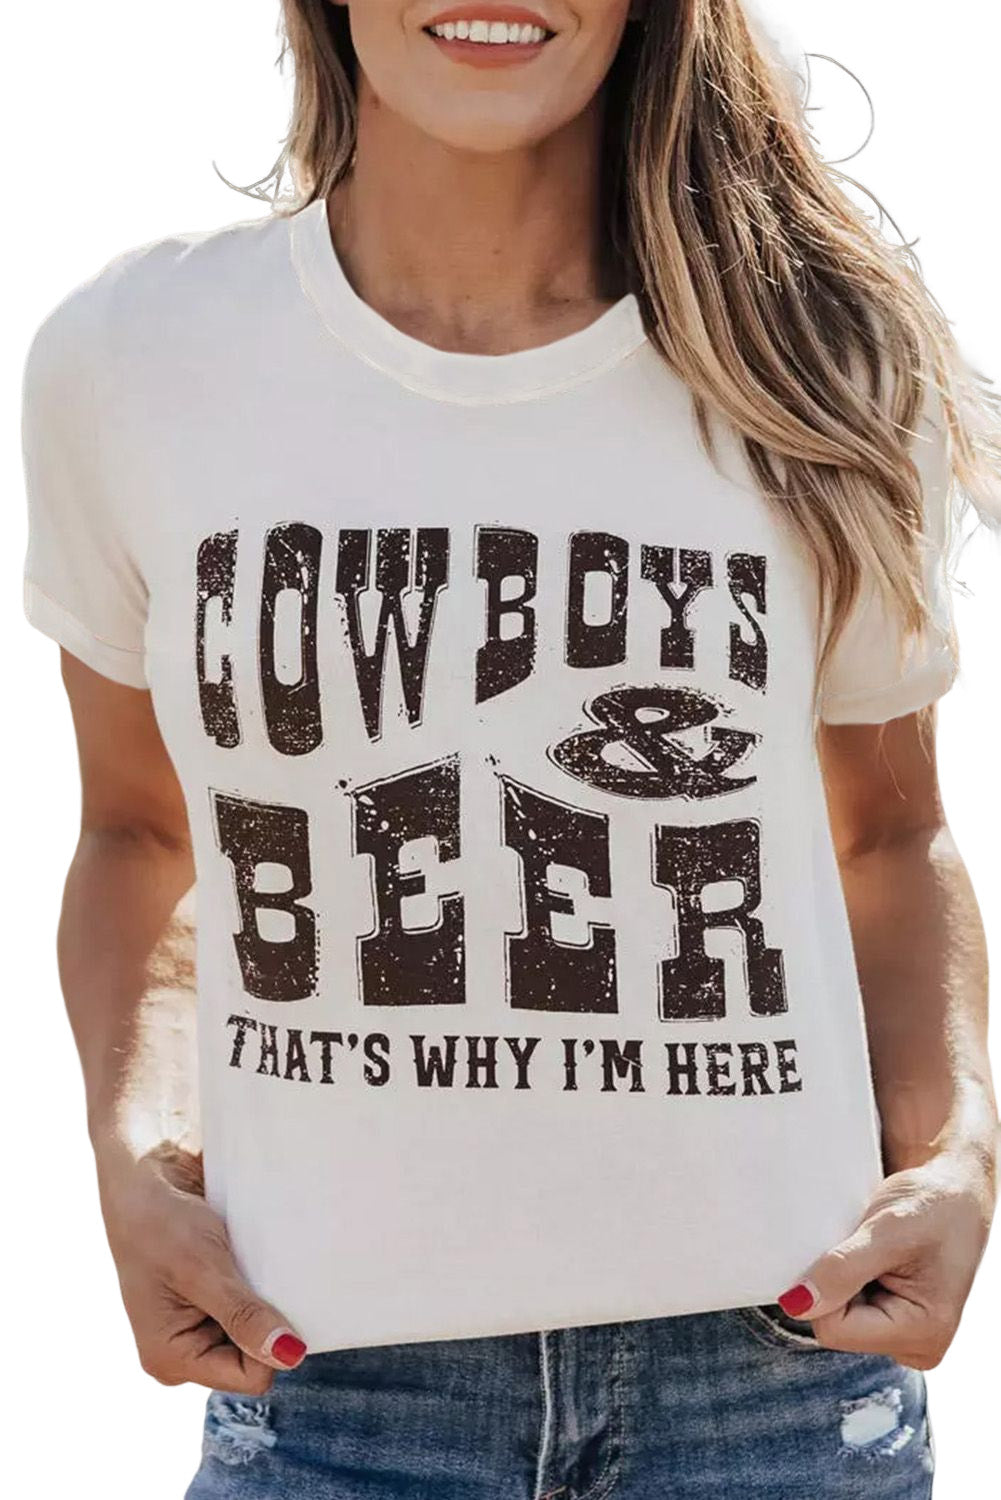 COW BOYS & BEERS Letters Graphic T-shirt